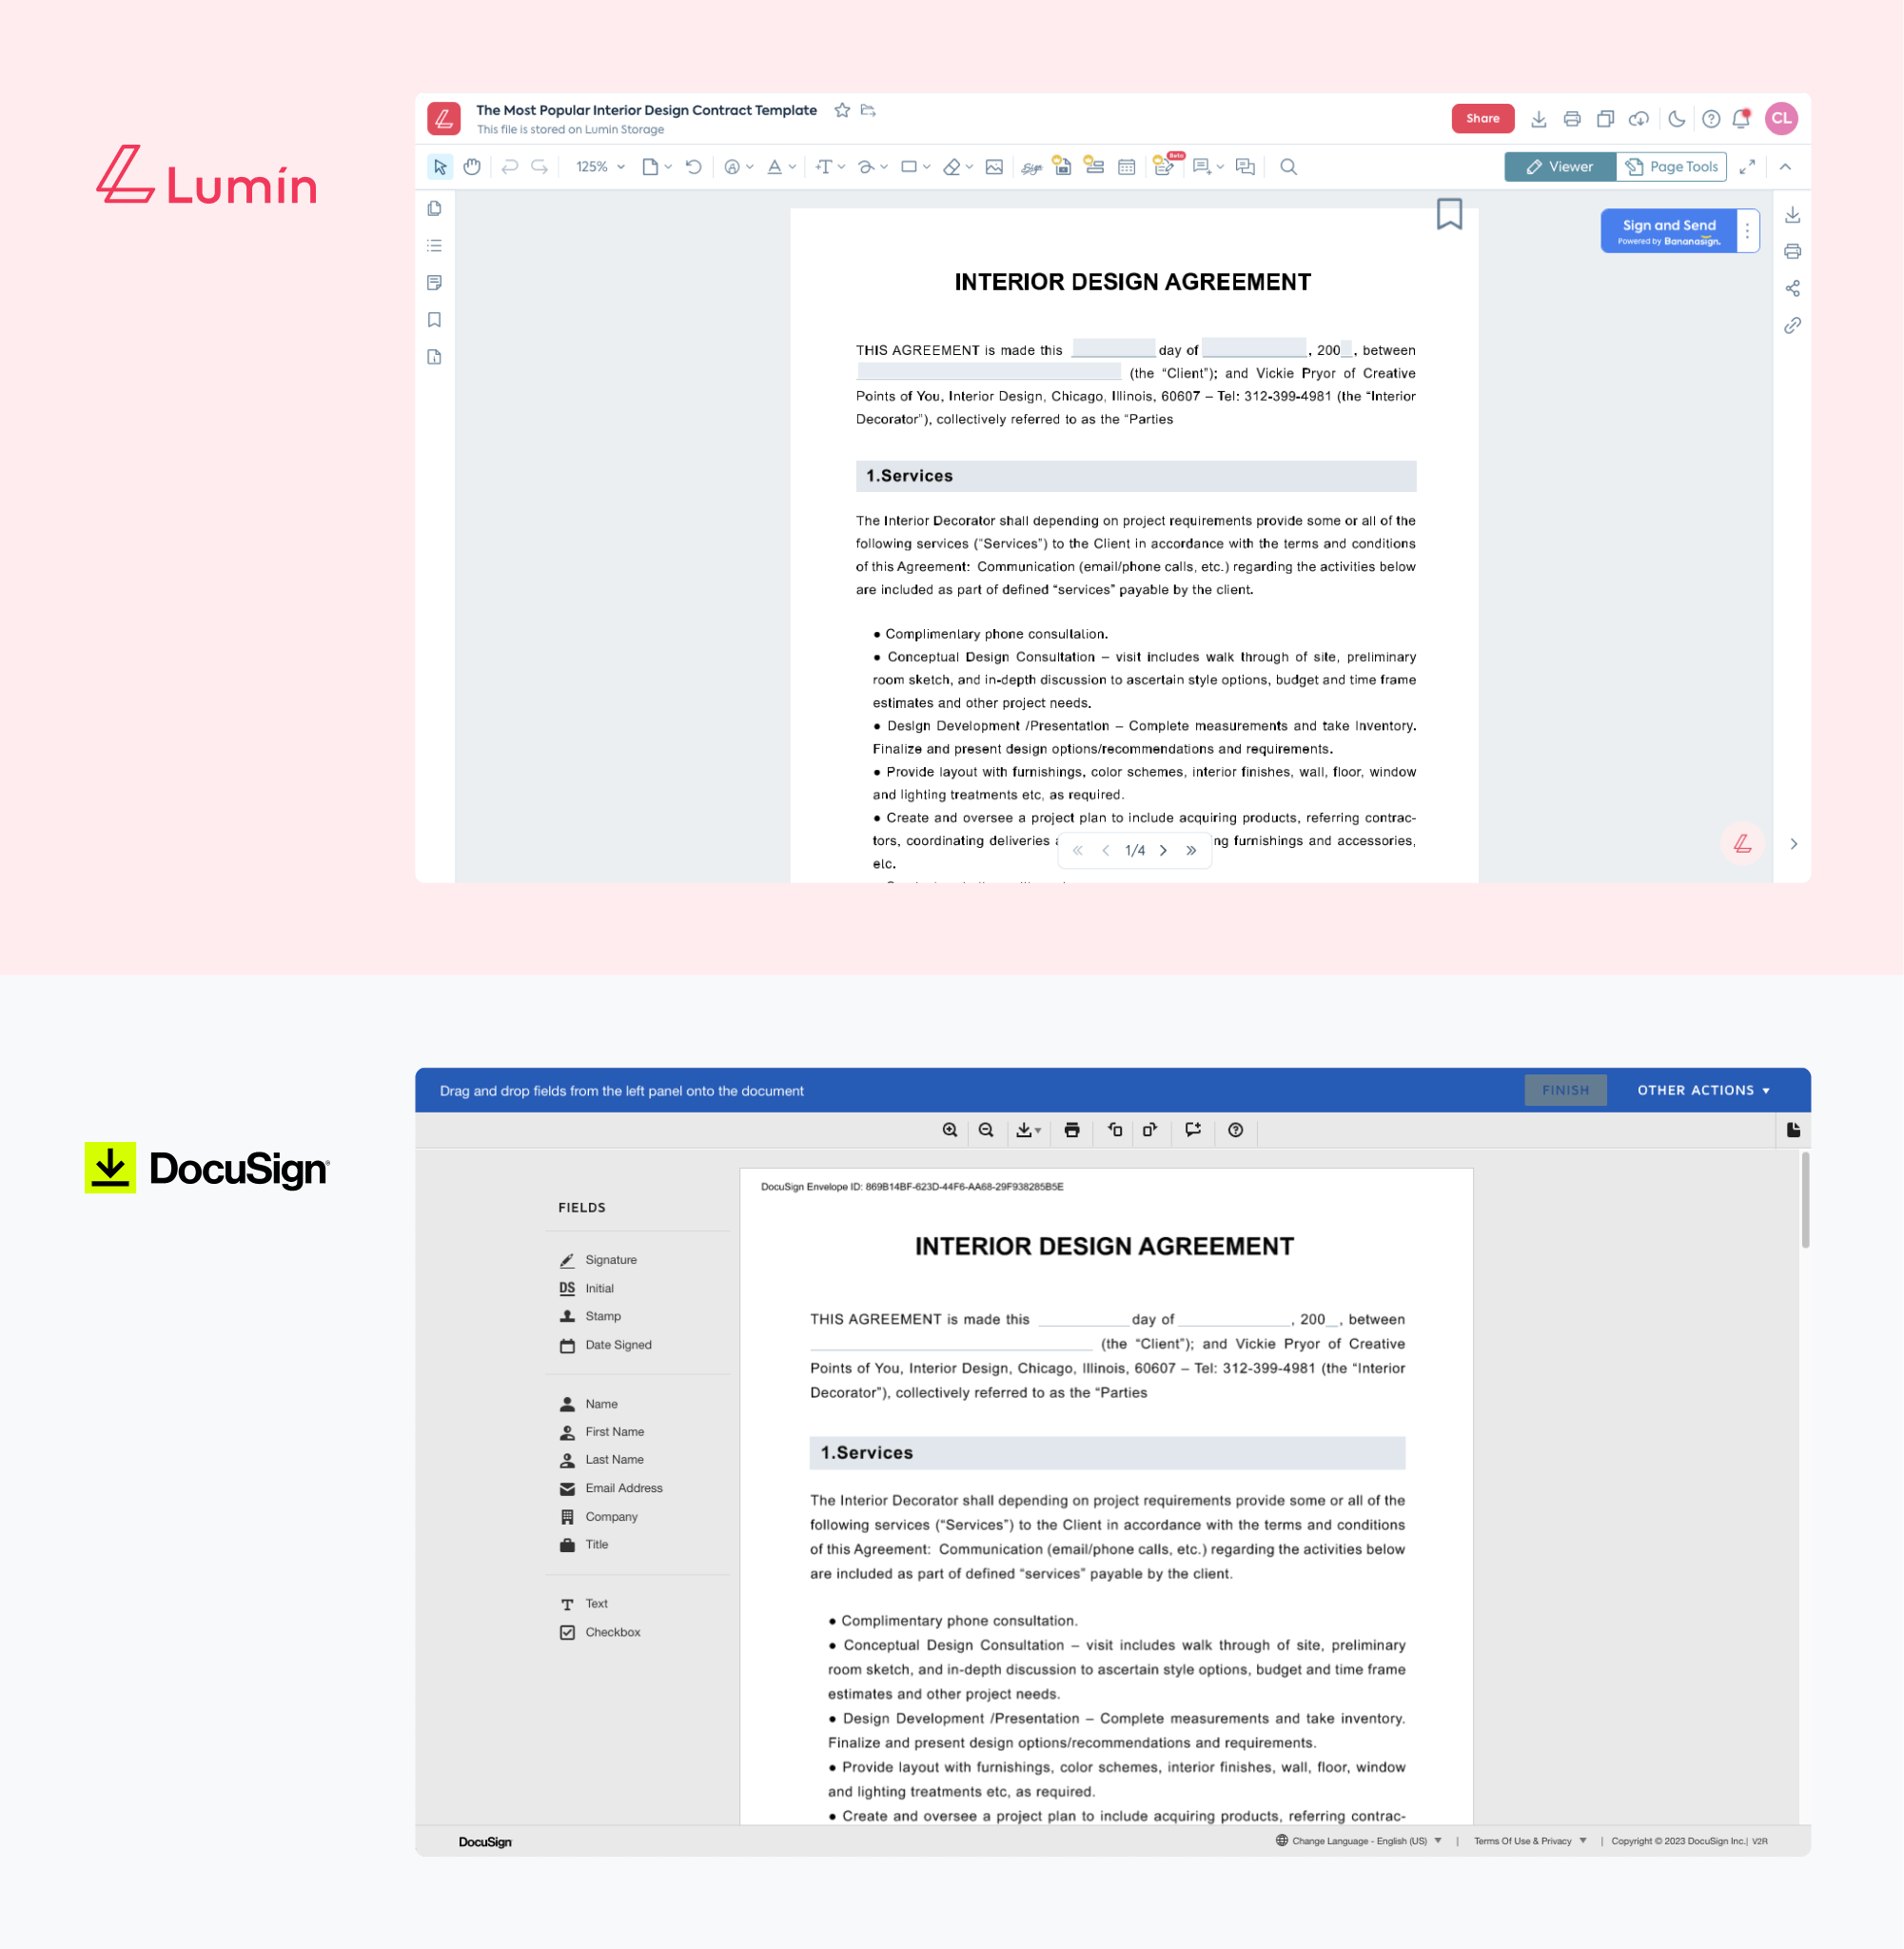 On top is an image of a document in the Lumin editor, and on the bottom is the same document in the DocuSign editor. Both editors have grey backgrounds. In DocuSign tool buttons are on the side, whereas in Lumin they are on the top.